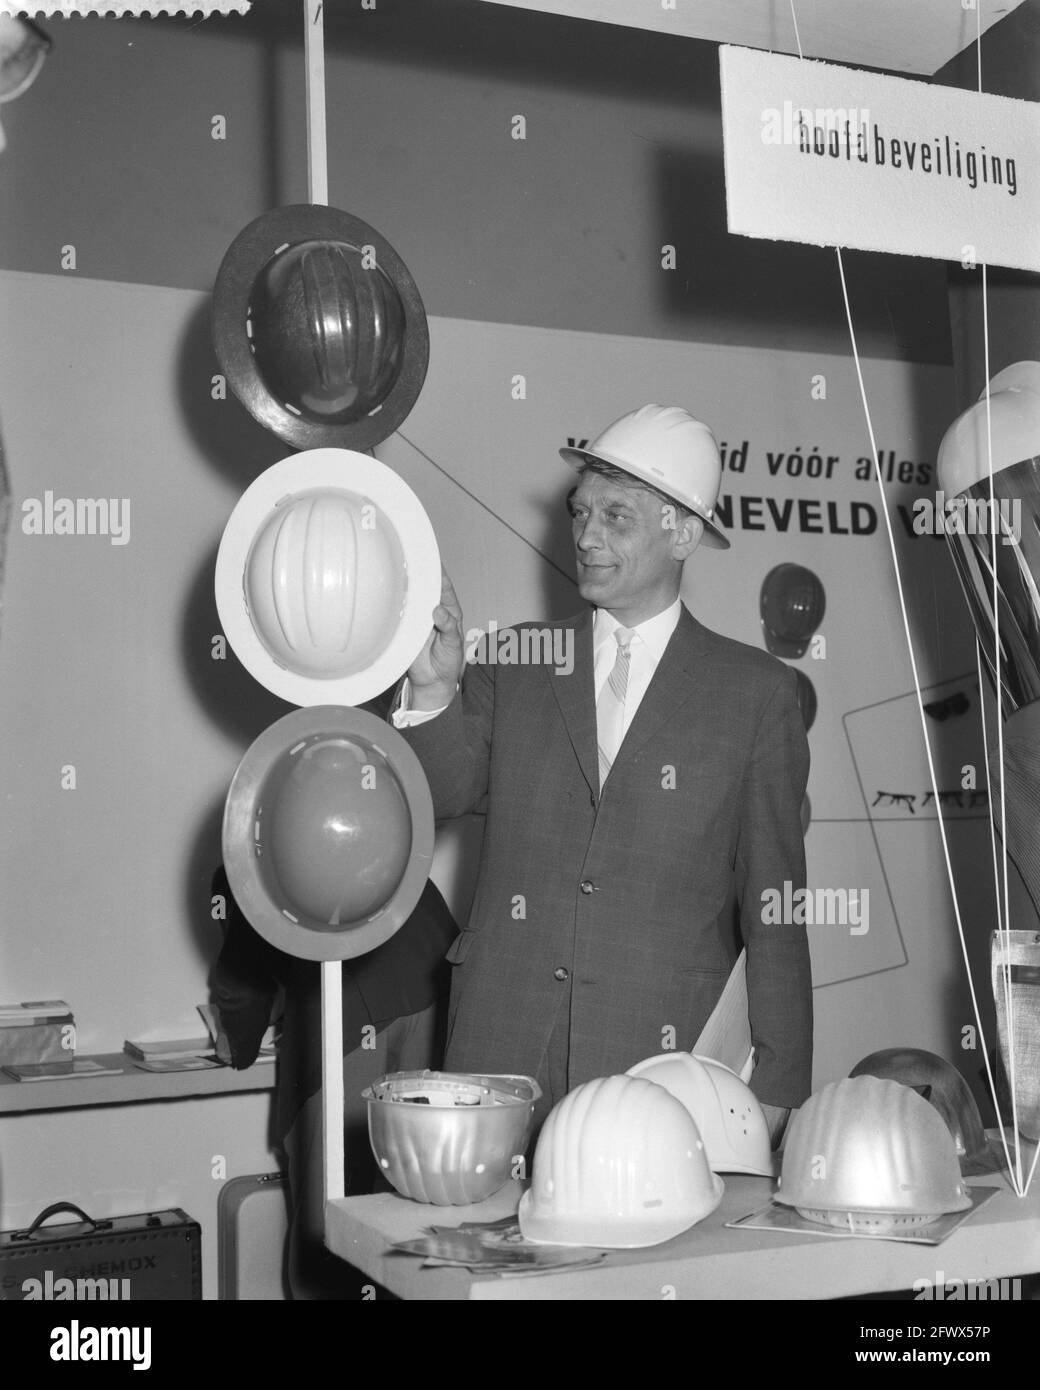 Opening Company Safety Exhibition at Amsterdam by State Secretary B. Roolvink . Roolvink, wearing safety helmet in helmet stand, April 17, 1961, HELMEN, Openings, STAND, The Netherlands, 20th century press agency photo, news to remember, documentary, historic photography 1945-1990, visual stories, human history of the Twentieth Century, capturing moments in time Stock Photo